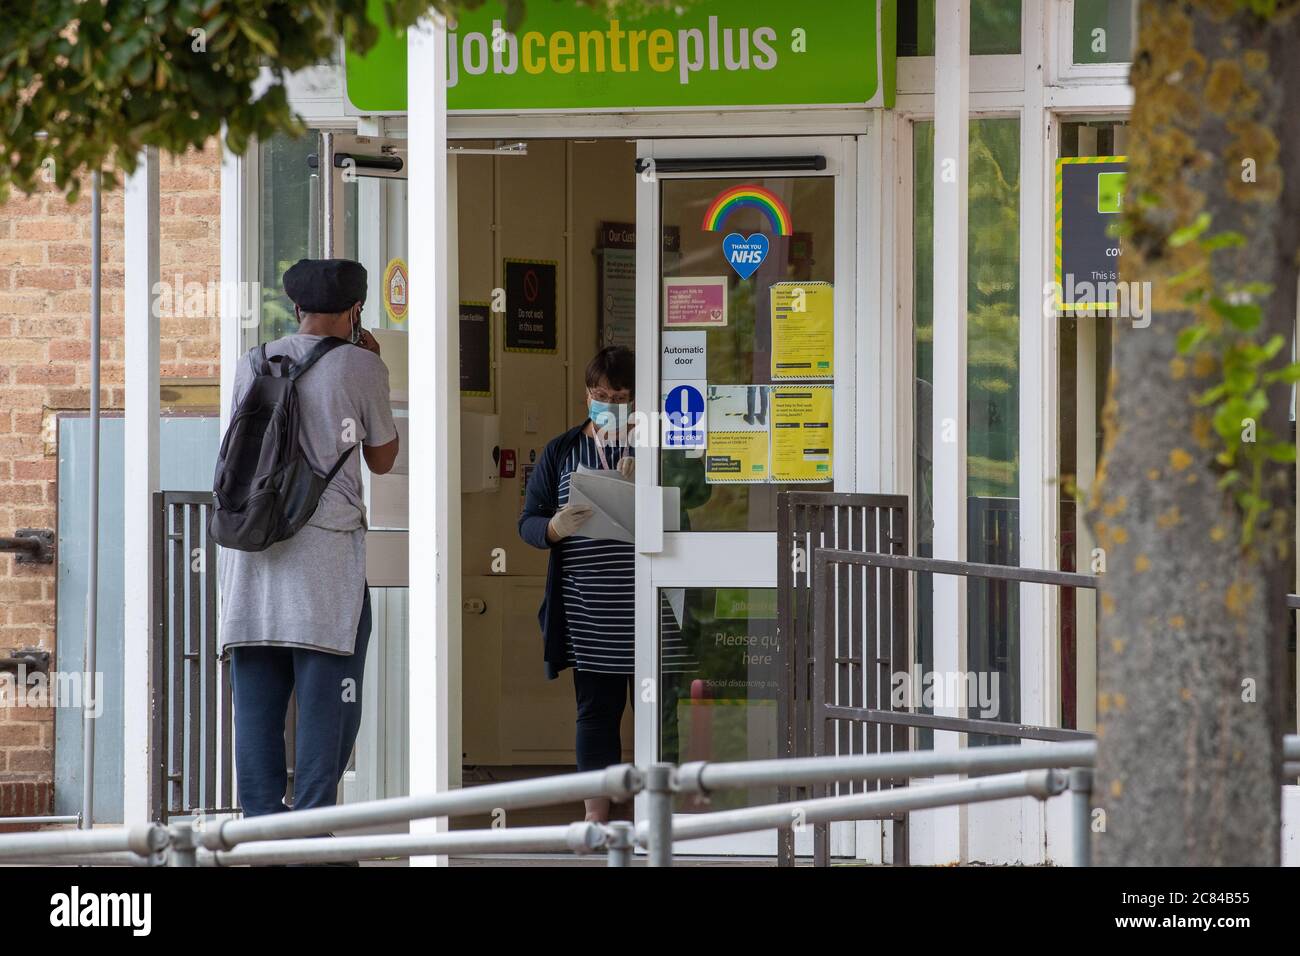 Picture dated July 15th 2020 shows people  outside the job centre in Cambridge.It was announced today the unemployment rate is  2.6 million people.   The number of workers on UK payrolls has fallen by 649,000 between March and June, official figures indicate.  The number of people claiming work-related benefits - including the unemployed - was 2.6 million.  However, the total was not as big as many feared, because large numbers of firms have put employees on the government-backed furlough scheme.  Economists say the full effect on employment will Stock Photo